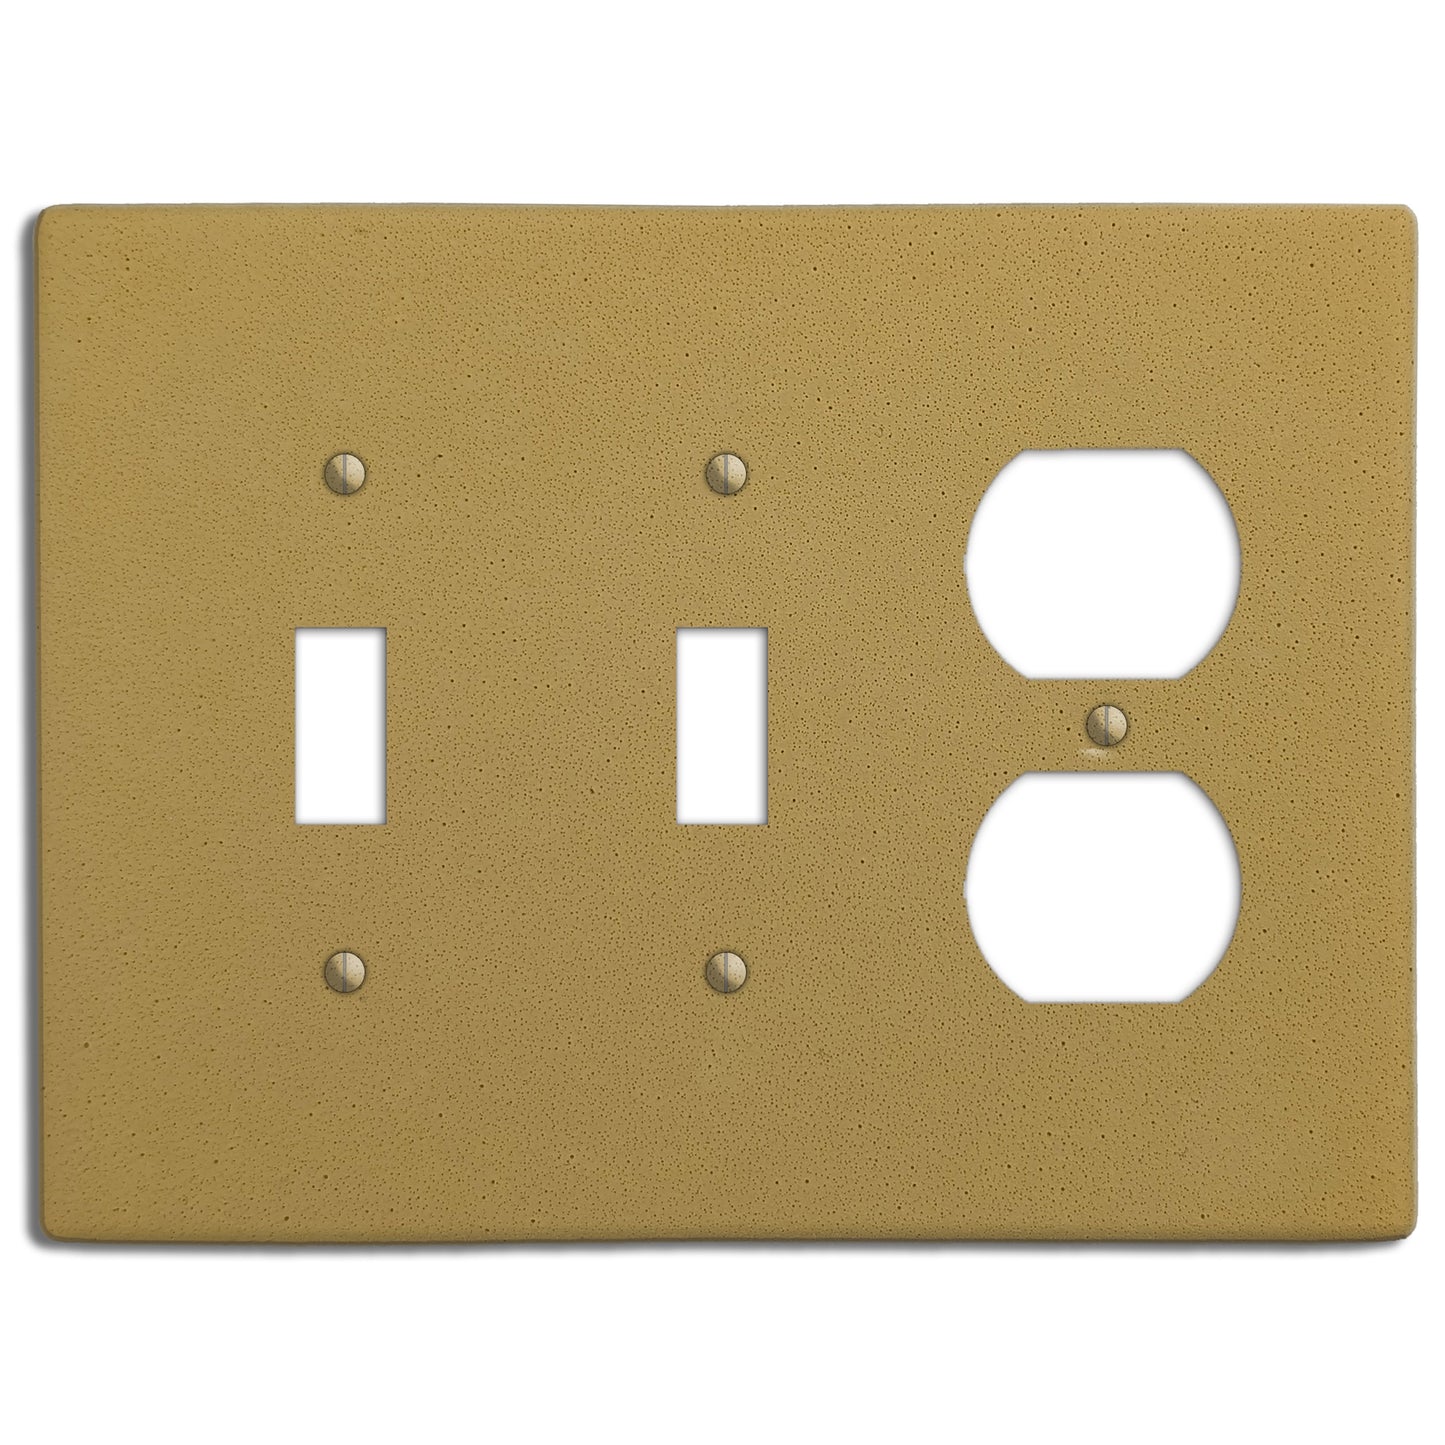 Saffron Yellow Boho Smooth 2 Toggle / Duplex Outlet Cover Plate